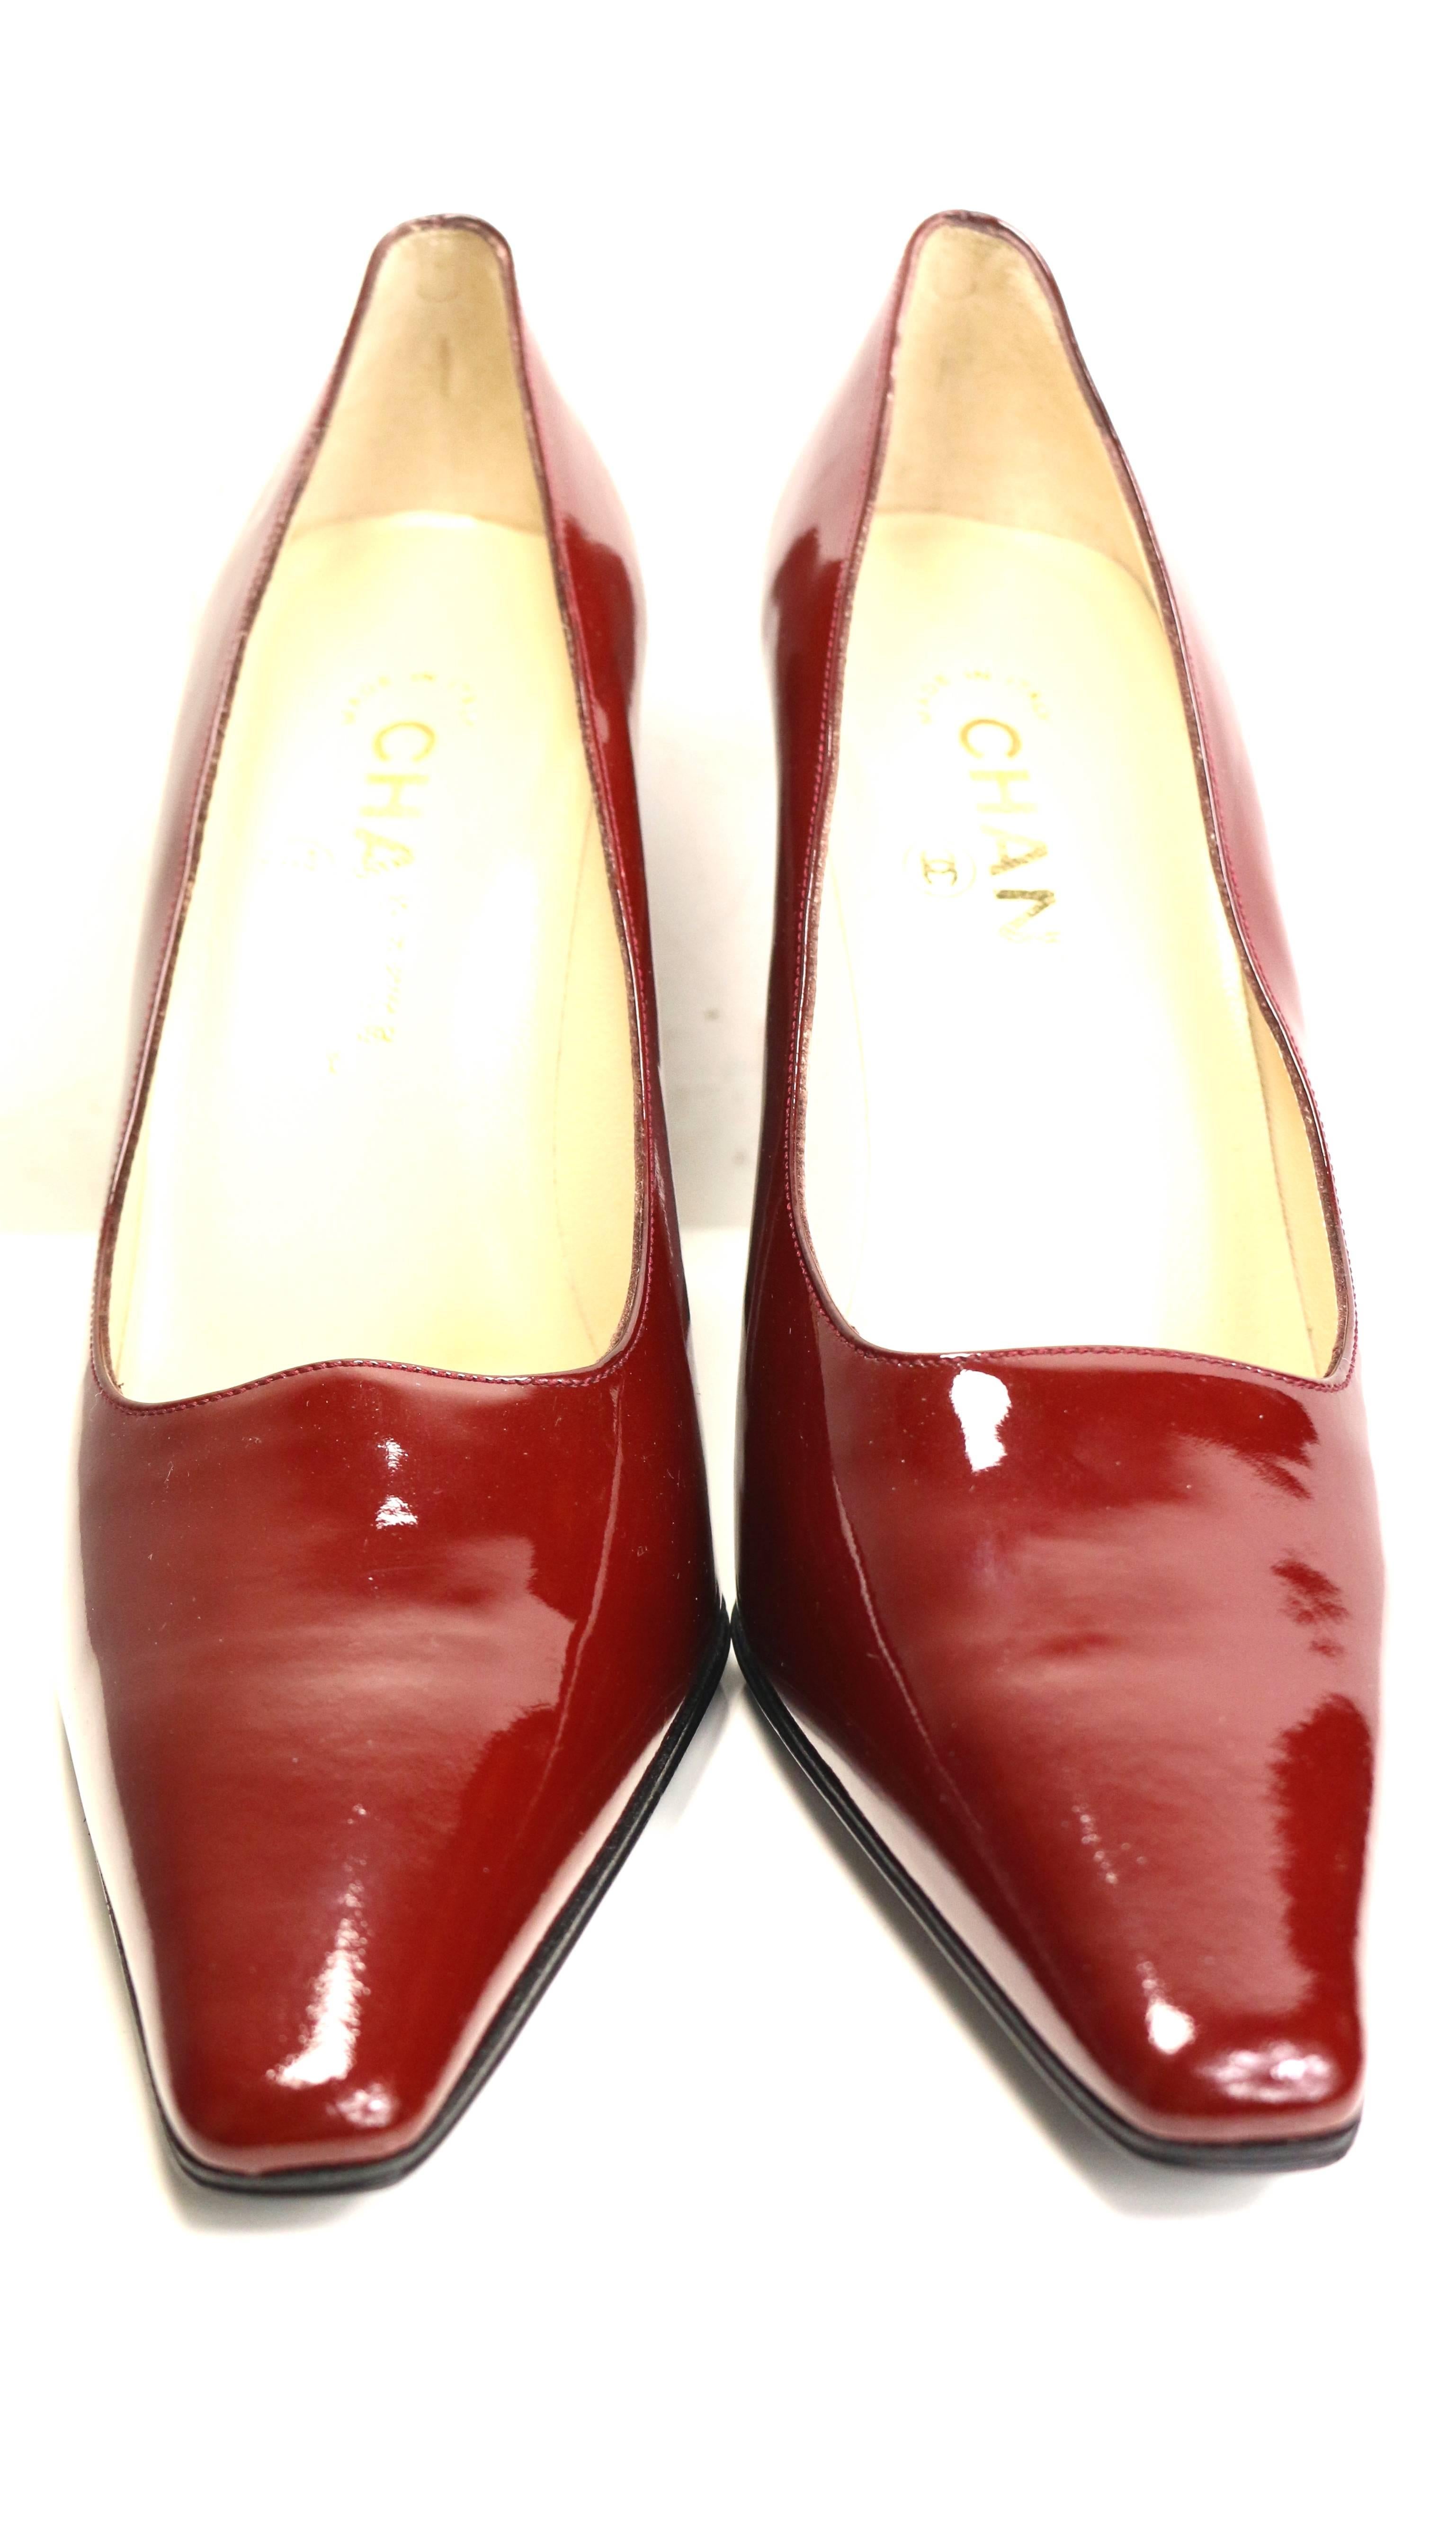 - It gives out a powerful and sexy vibe to others when wearing this Chanel red pumps. 

- Rectangle shape high heels. 

- Size 38. 

- Made in Italy. 

- Even though this pumps has never been worn before but is slightly scratches.